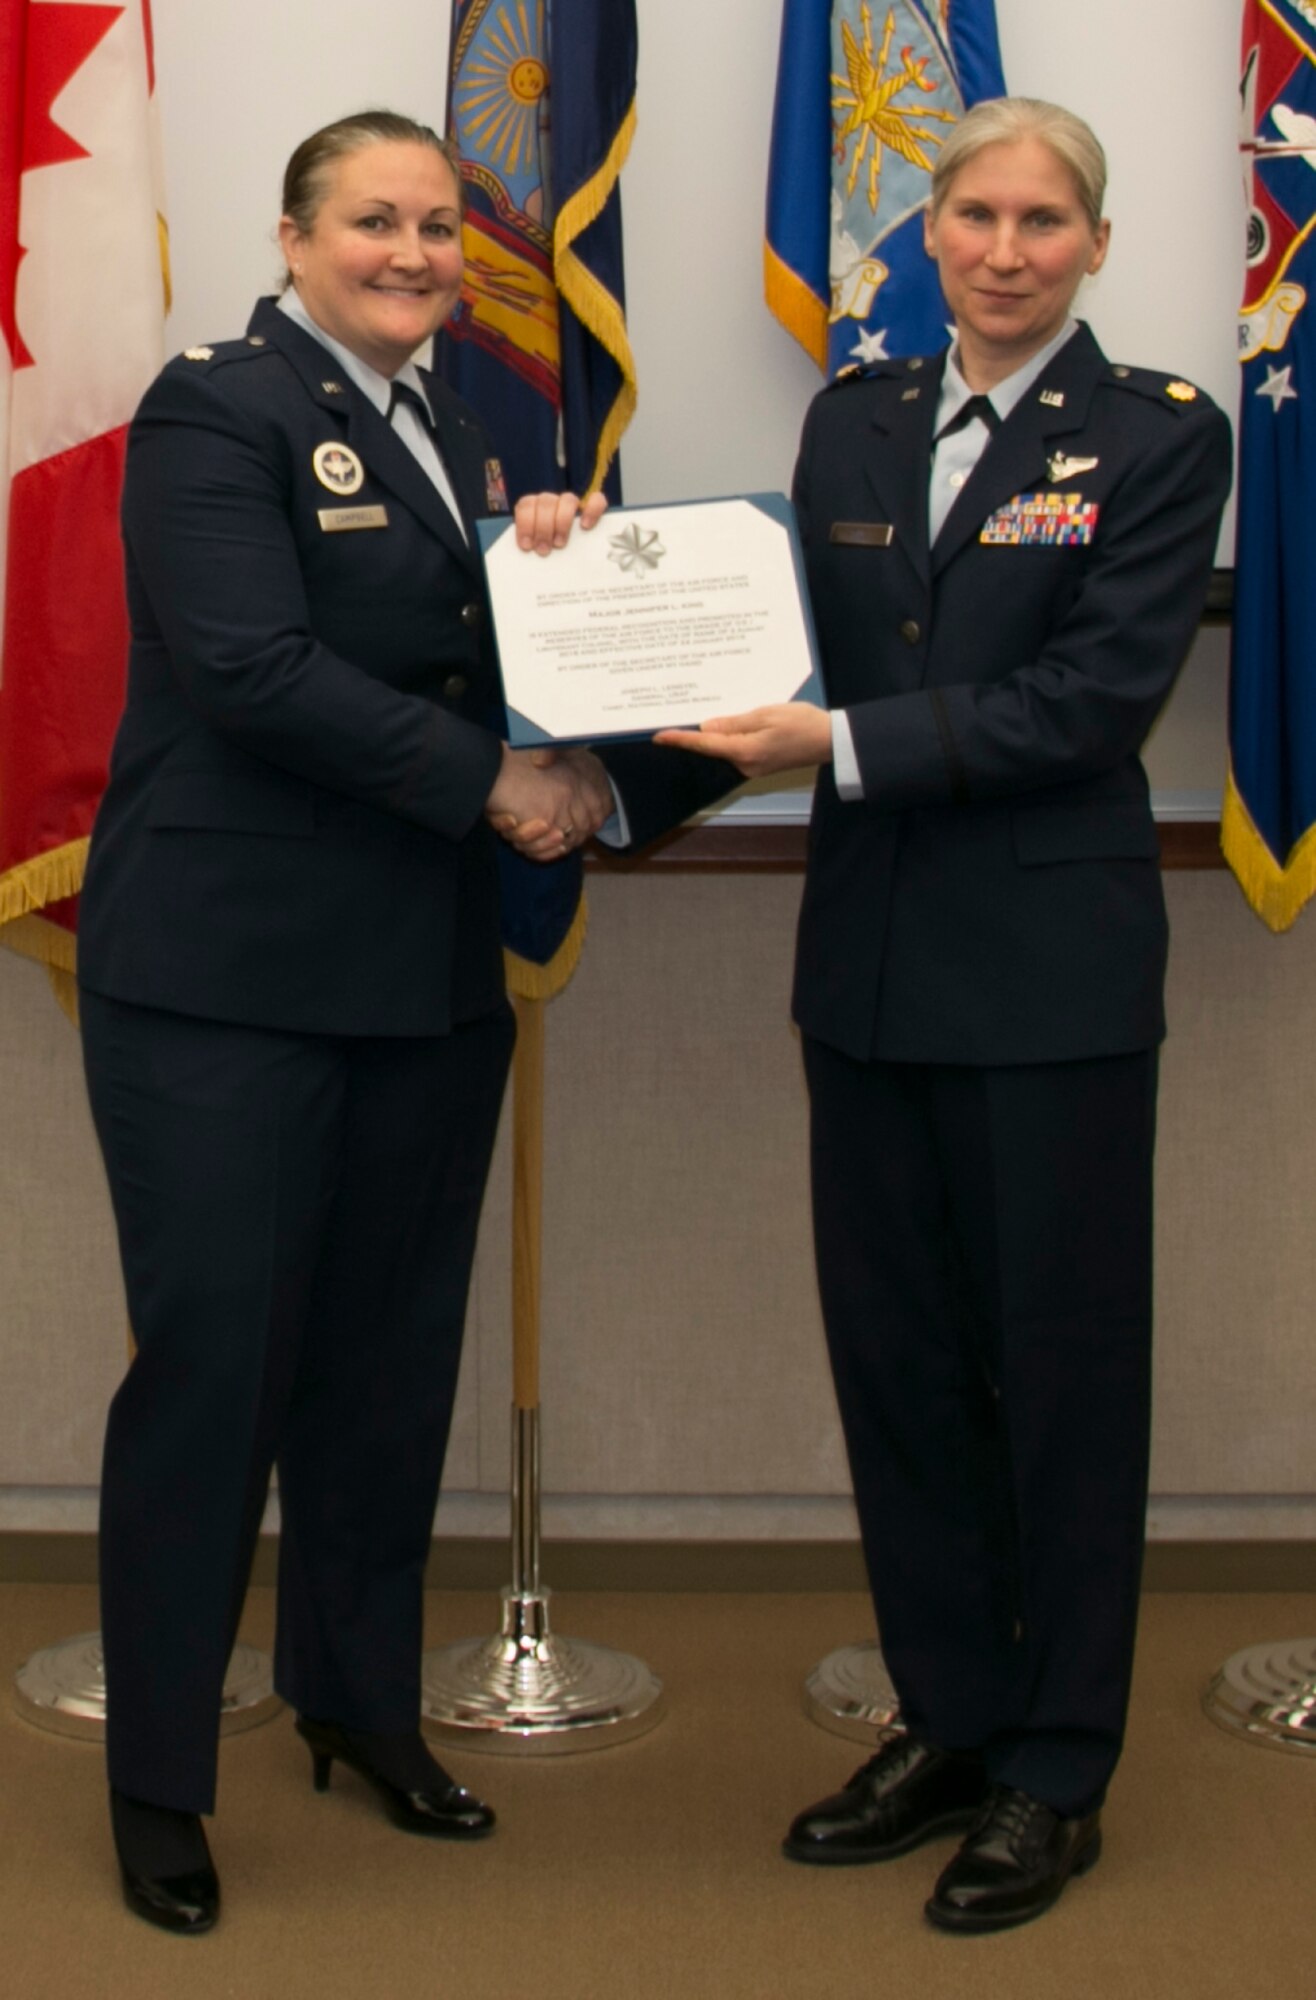 King Promoted to Lt Col